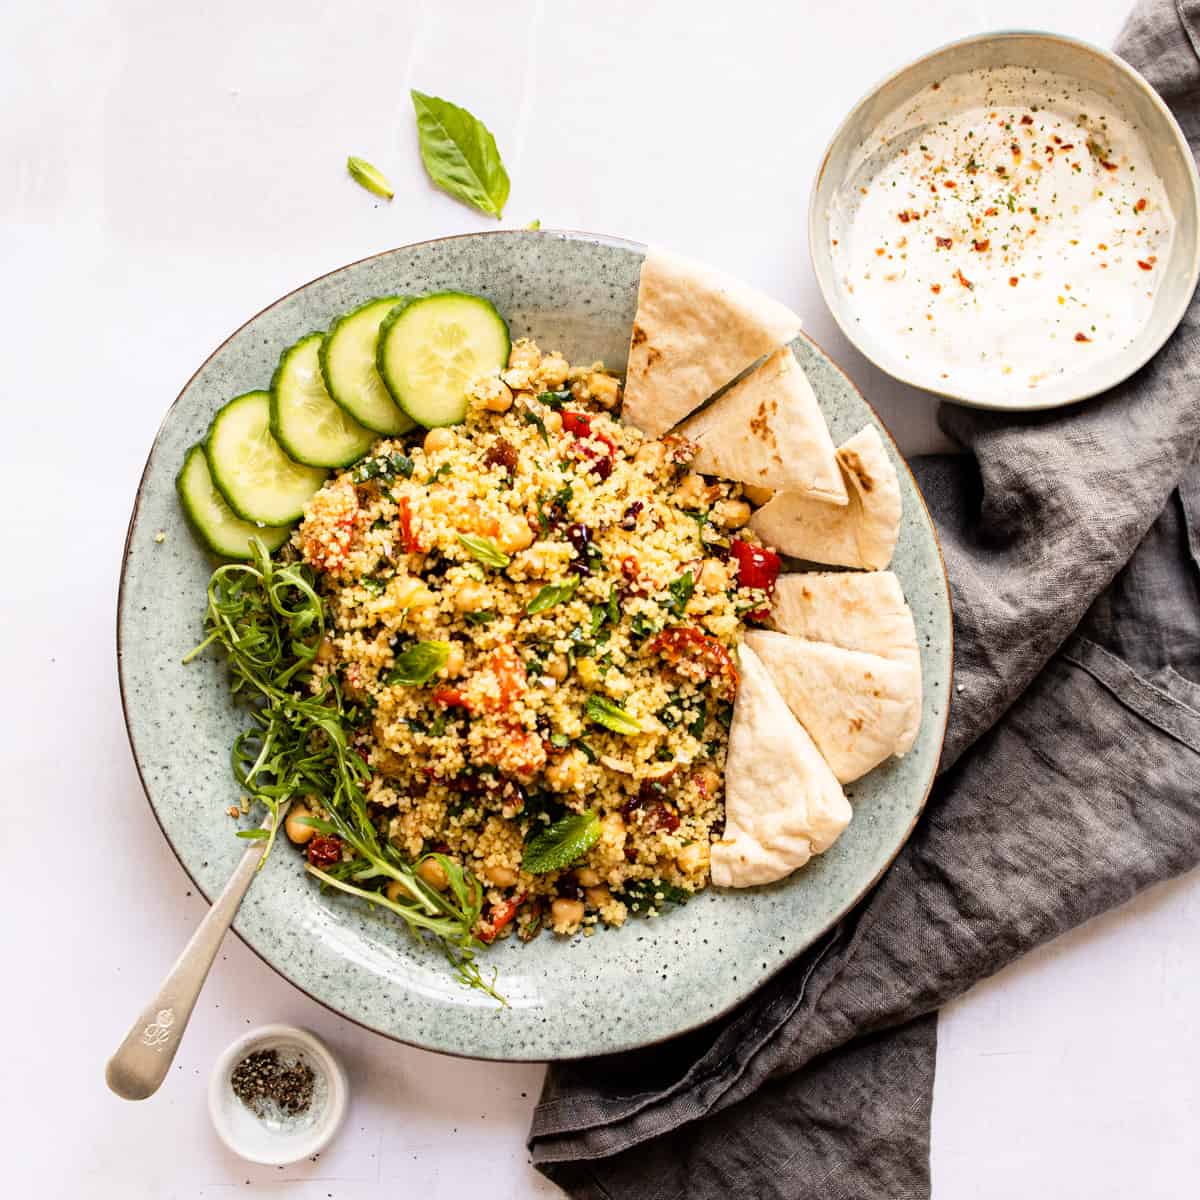 Moroccan couscous in a blue bowl with pita bread